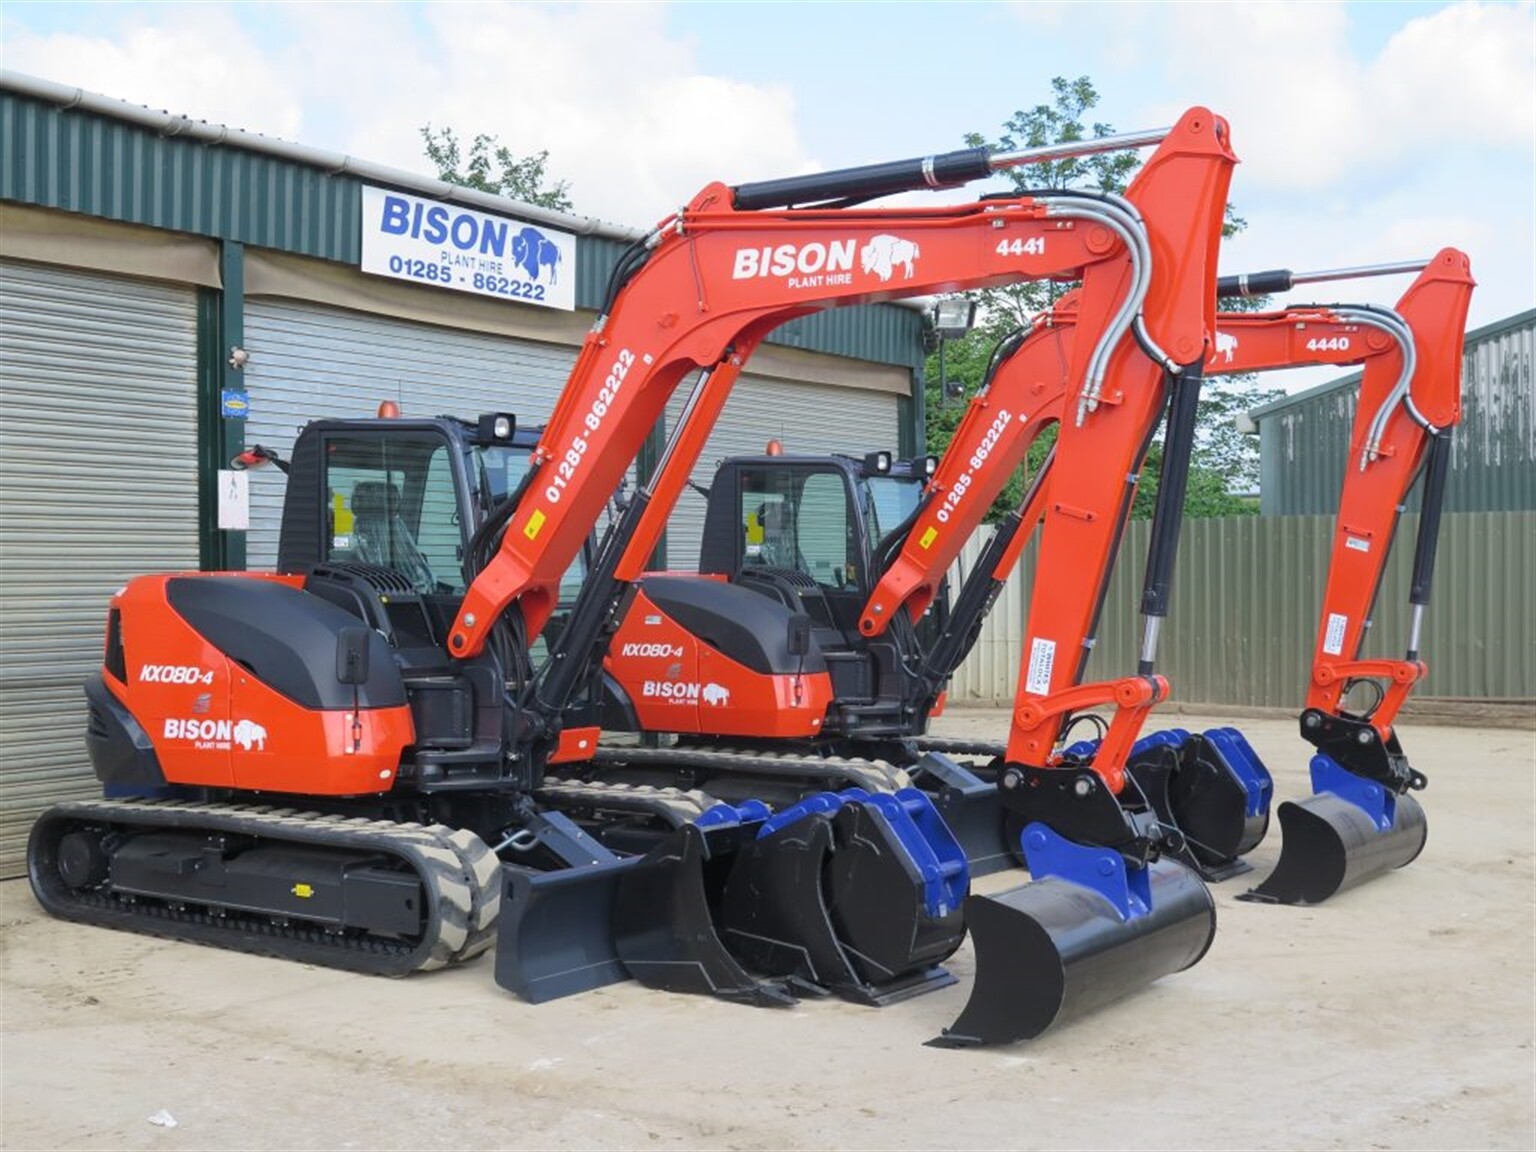 Bison charge on with more new Kubota's for its hire fleet